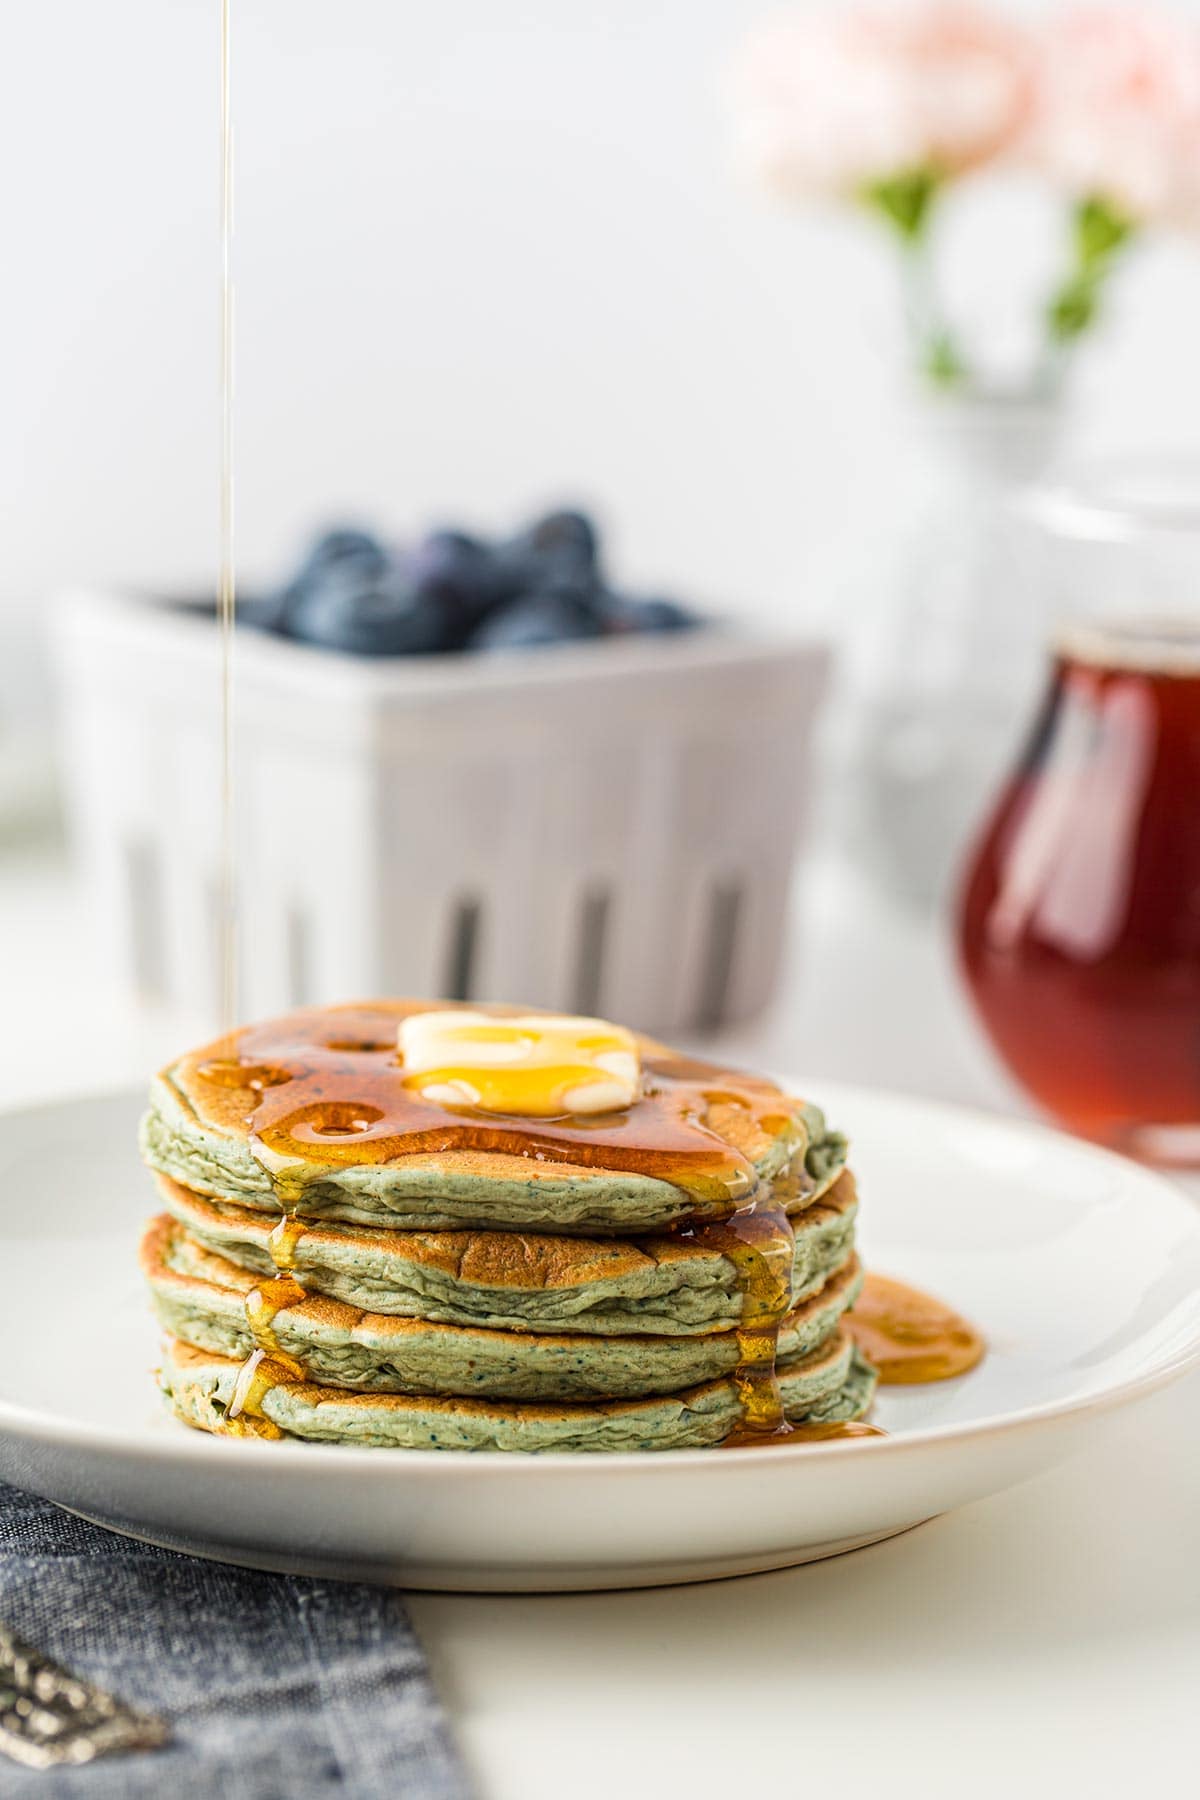 White plate with stack of 4 leftover oatmeal blender pancakes topped with butter and syrup, basket of blueberries and jar of syrup in background.